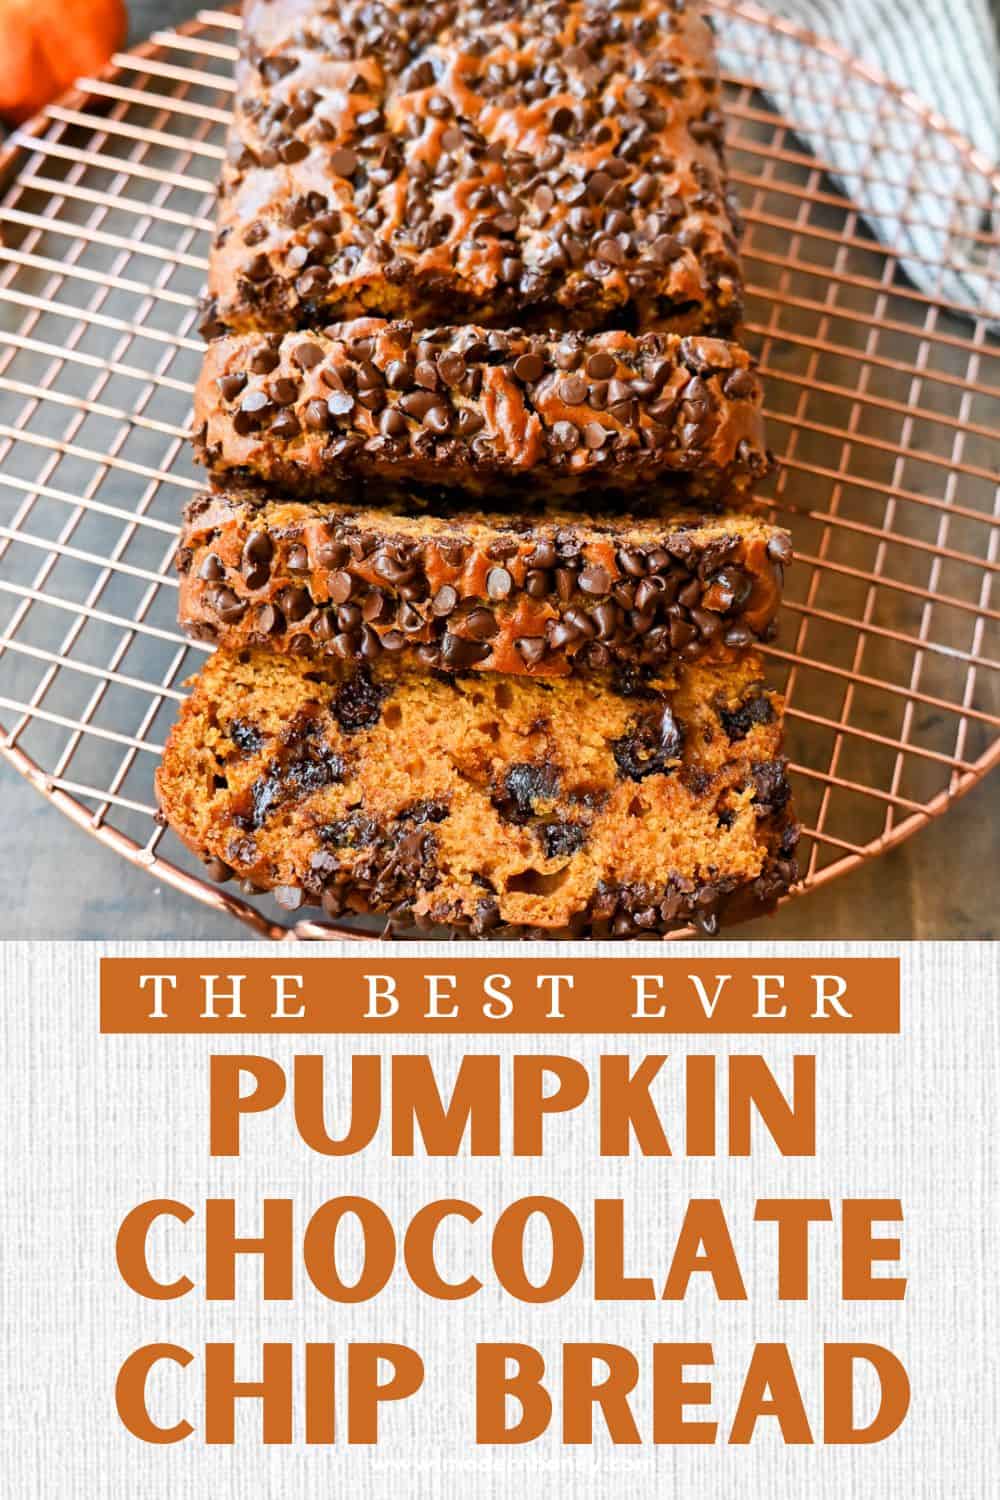 How to make the best pumpkin chocolate chip bread ever! This moist pumpkin spiced bread with chocolate chips will be a Fall favorite. It is the most perfect chocolate chip pumpkin bread. 